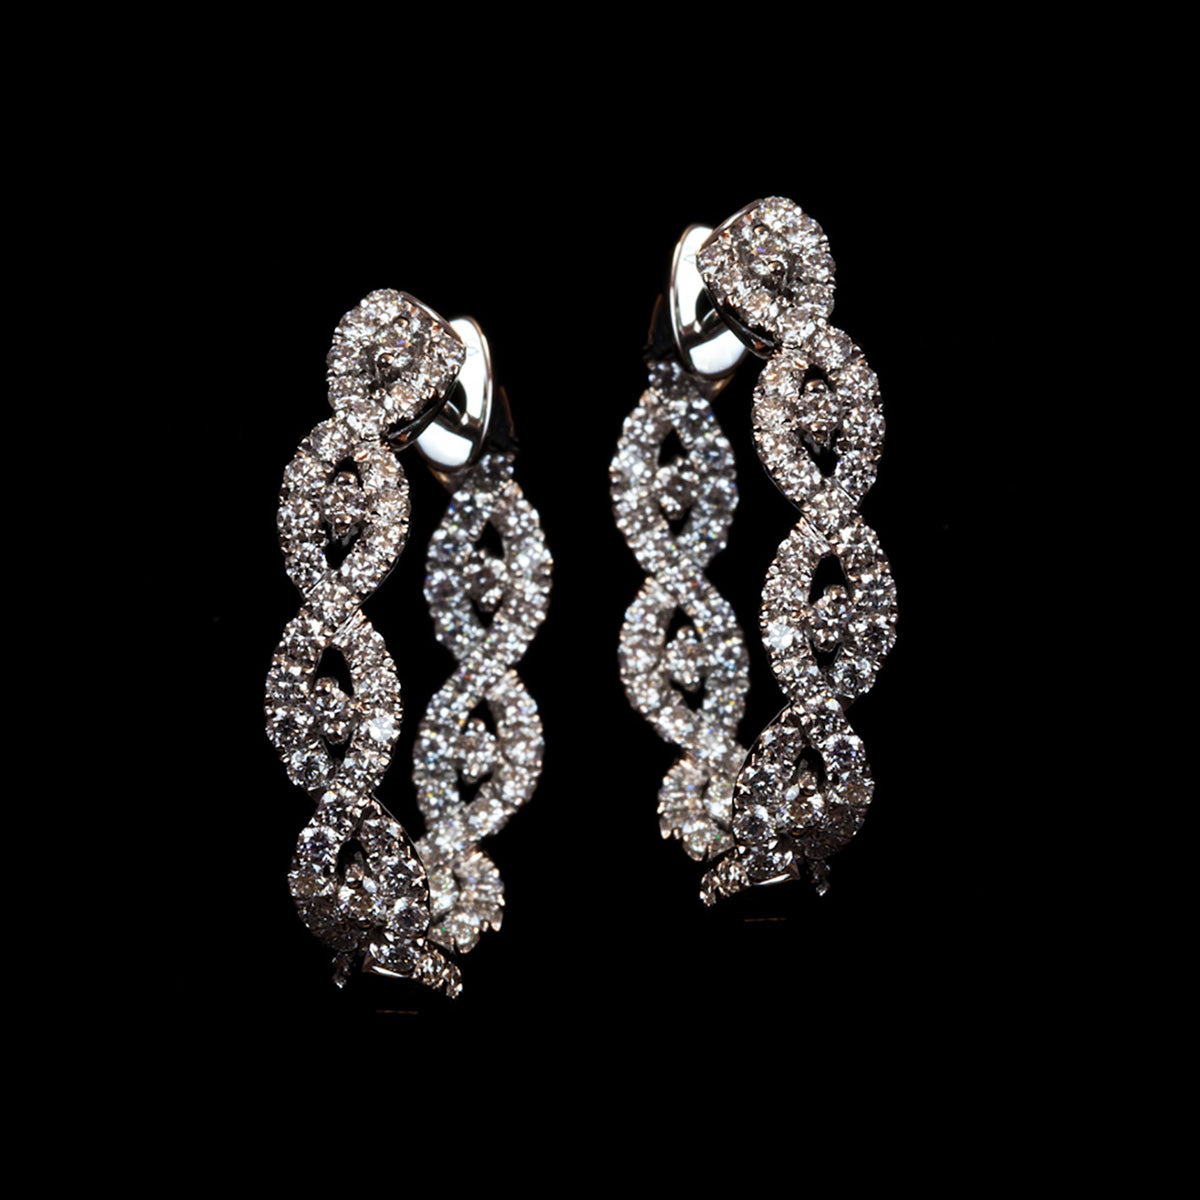 Diamond Intertwined White Gold Small Hoop Earrings on a black background